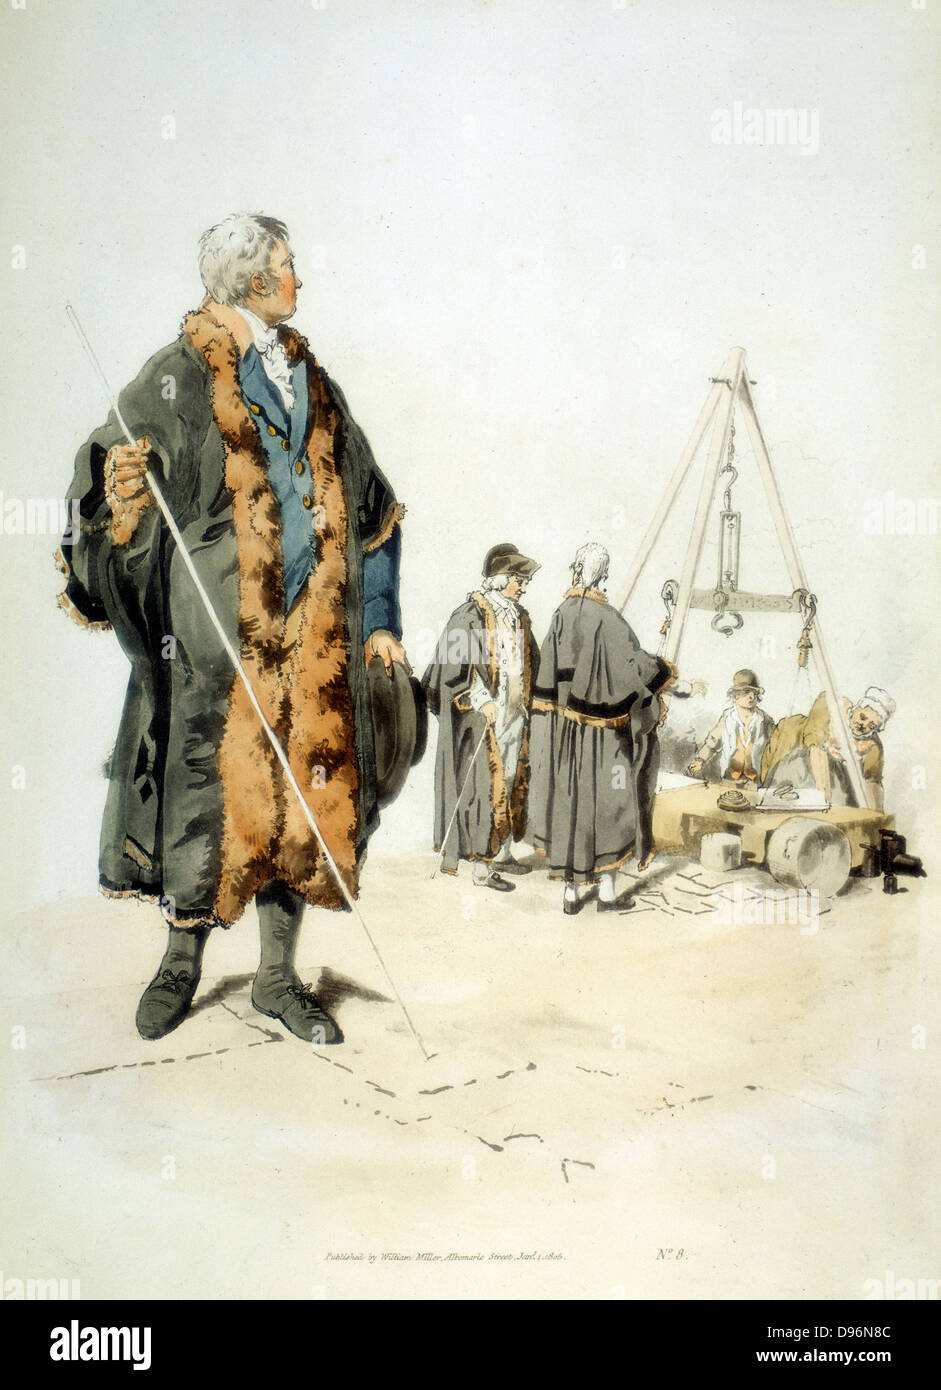 Member of a London Wardmote Inquest in official dress. These bodies checked weights and measures for accuracey. From William Henry Pyne 'Costume of Great Britain', London, 1808. Stock Photo